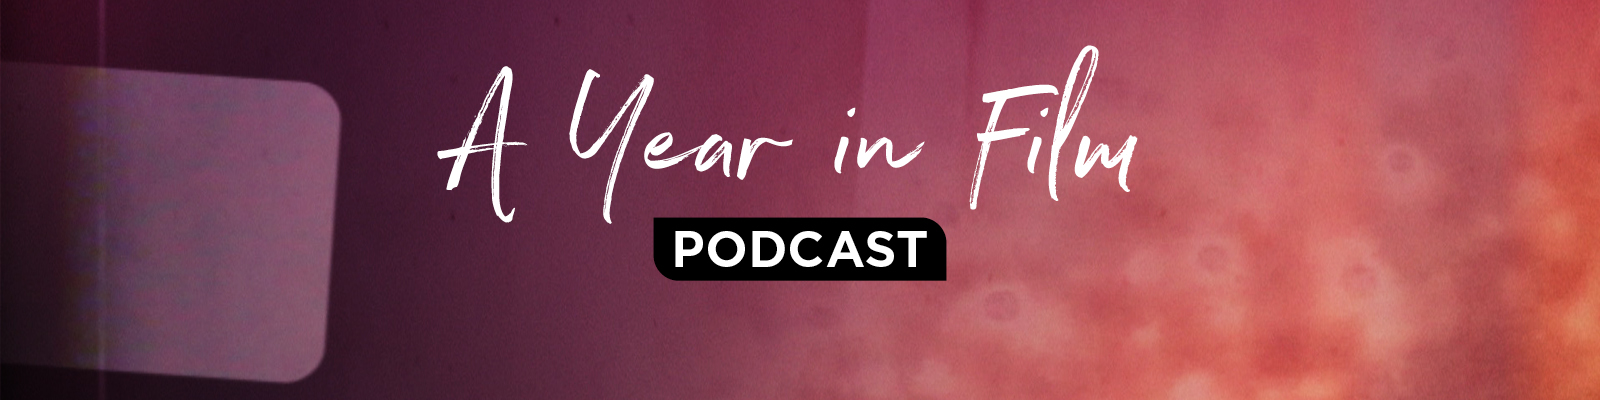 A Year In Film Podcast